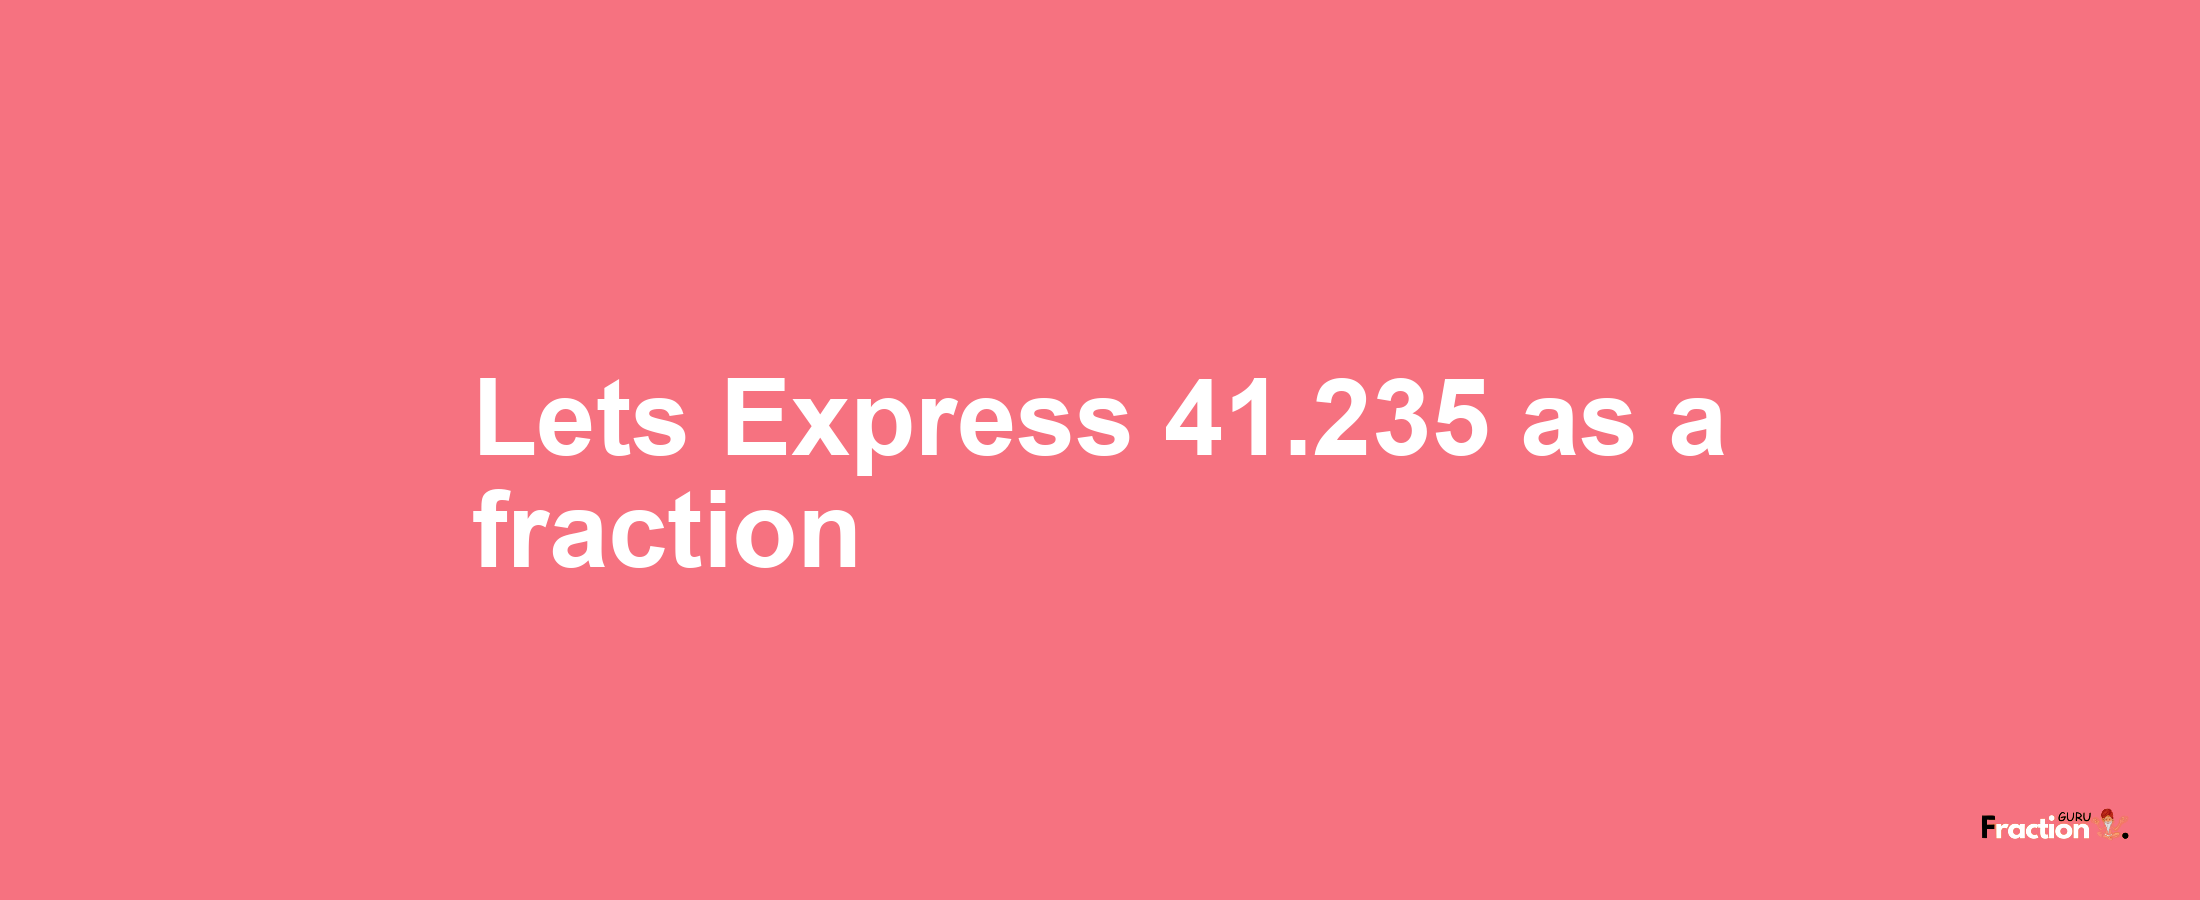 Lets Express 41.235 as afraction